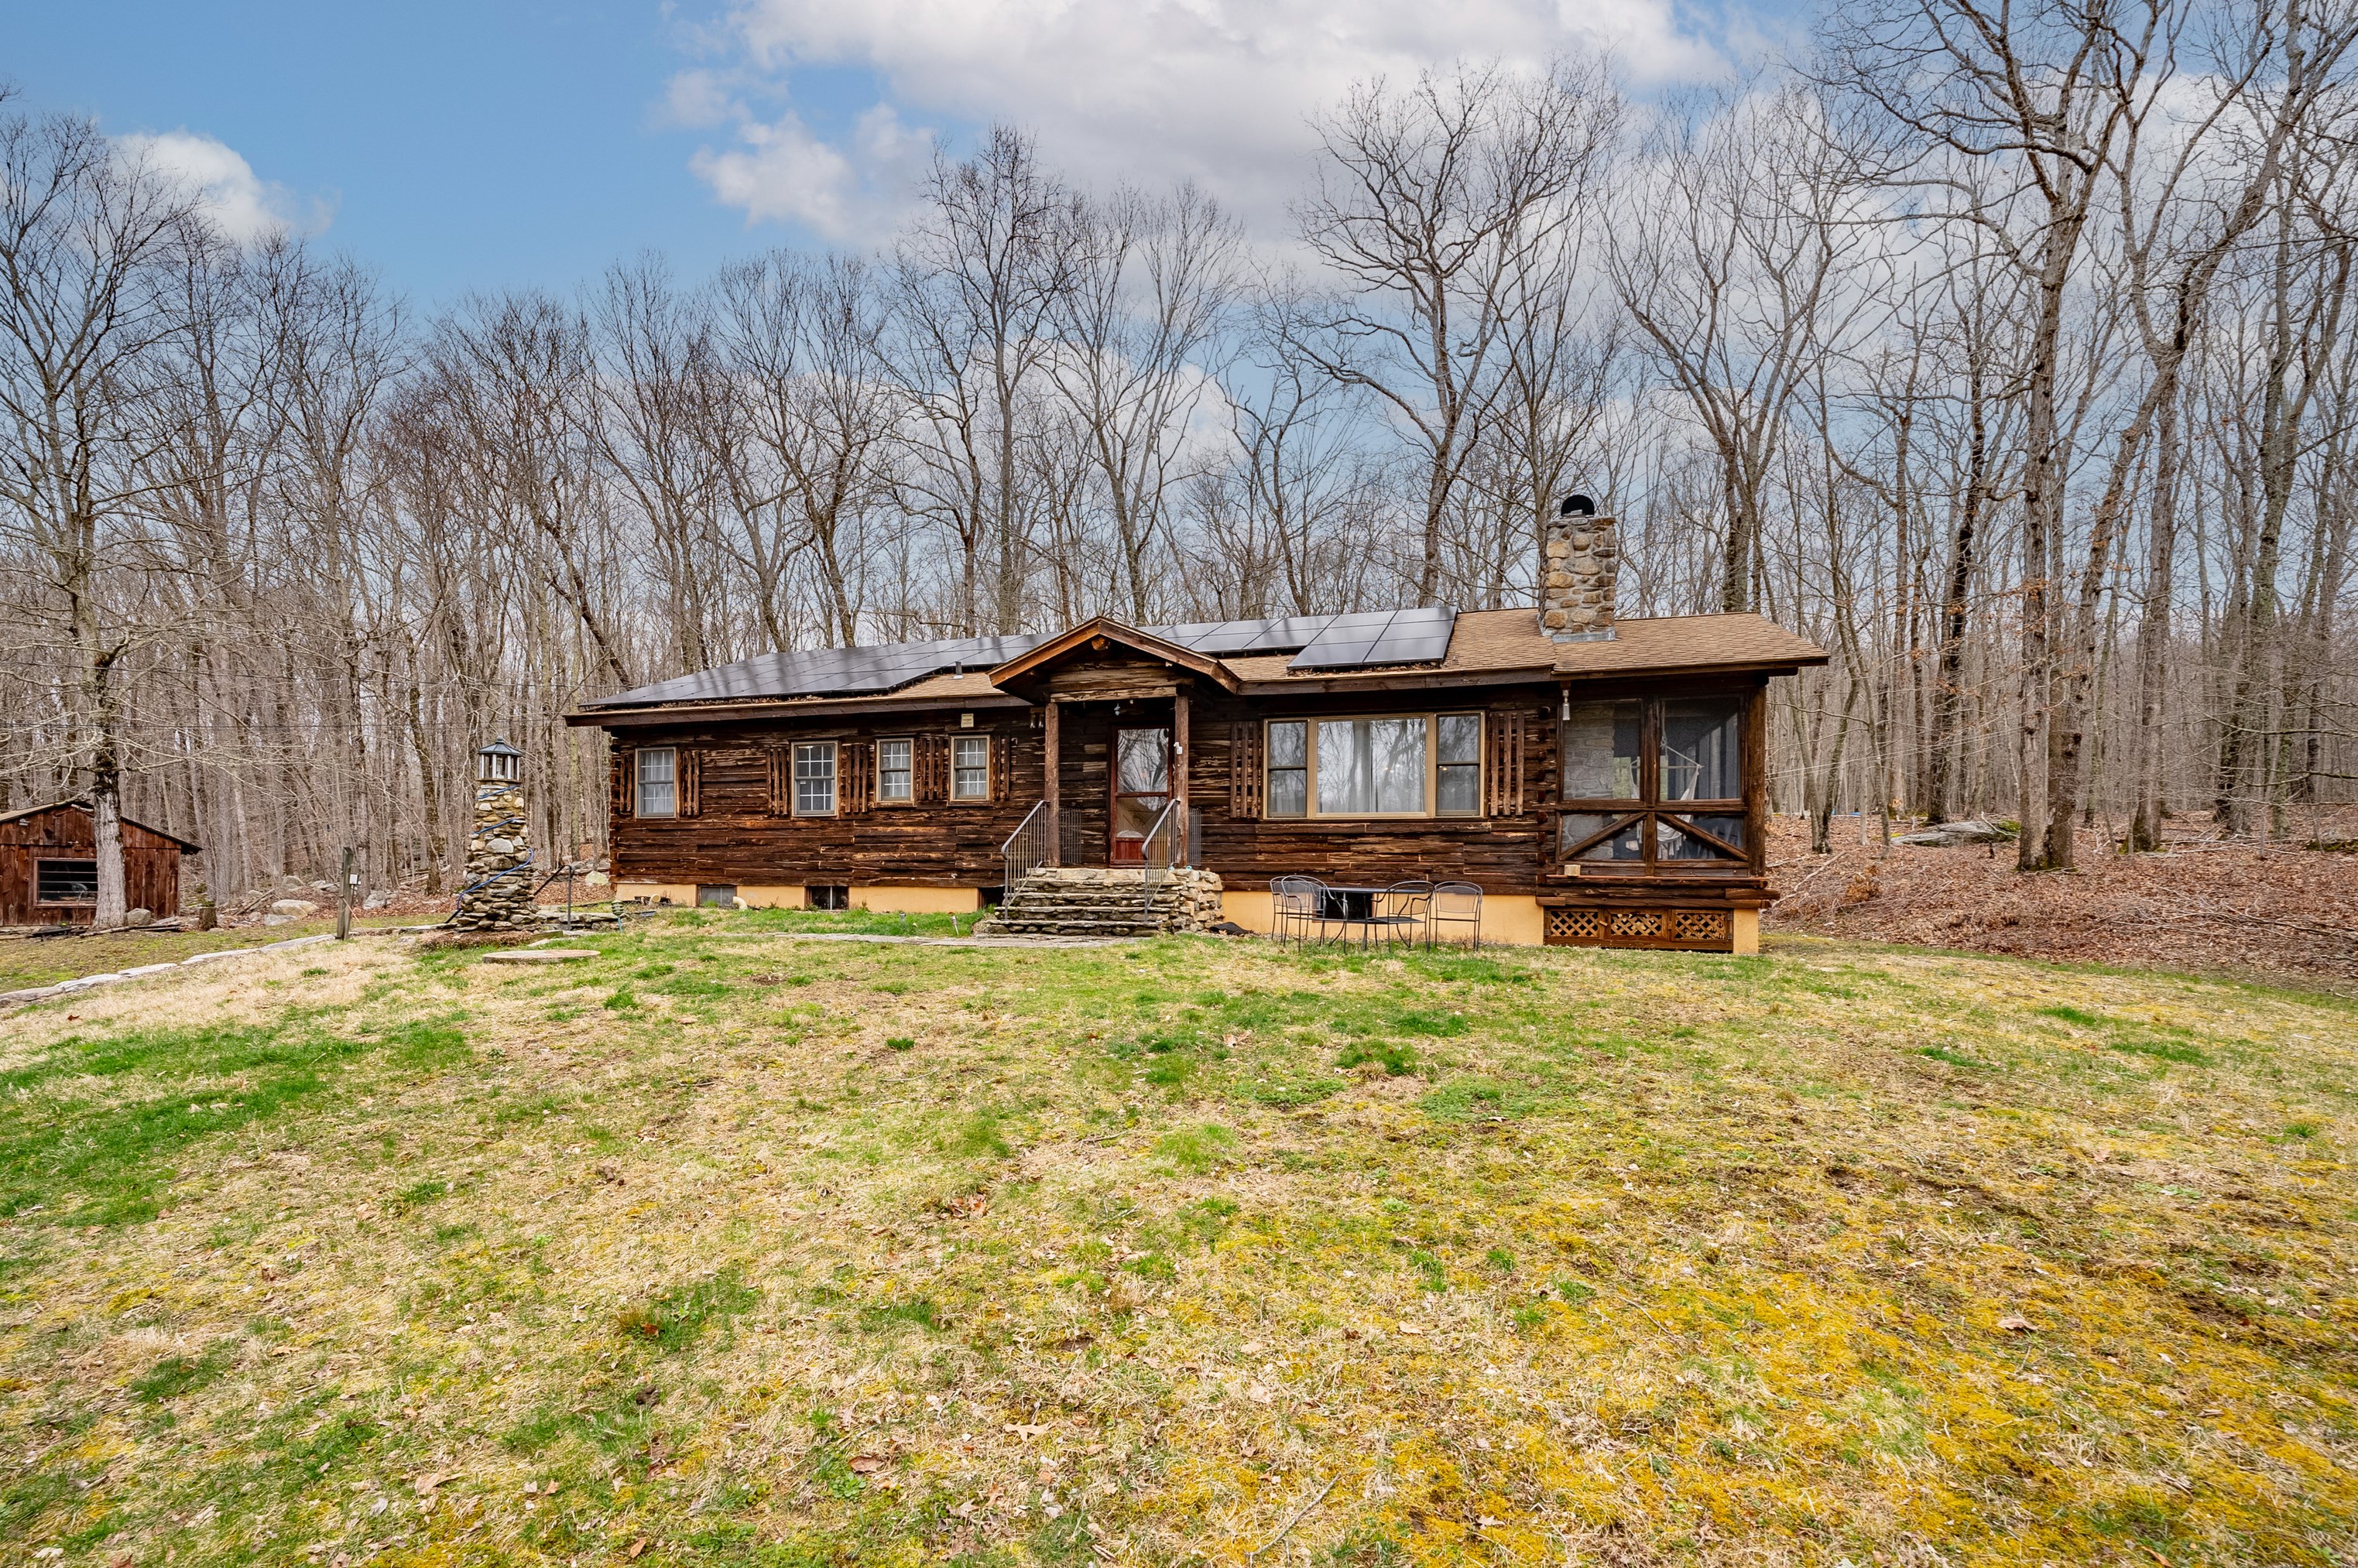 75 Crane Hill Rd, Storrs Mansfield, CT 06268